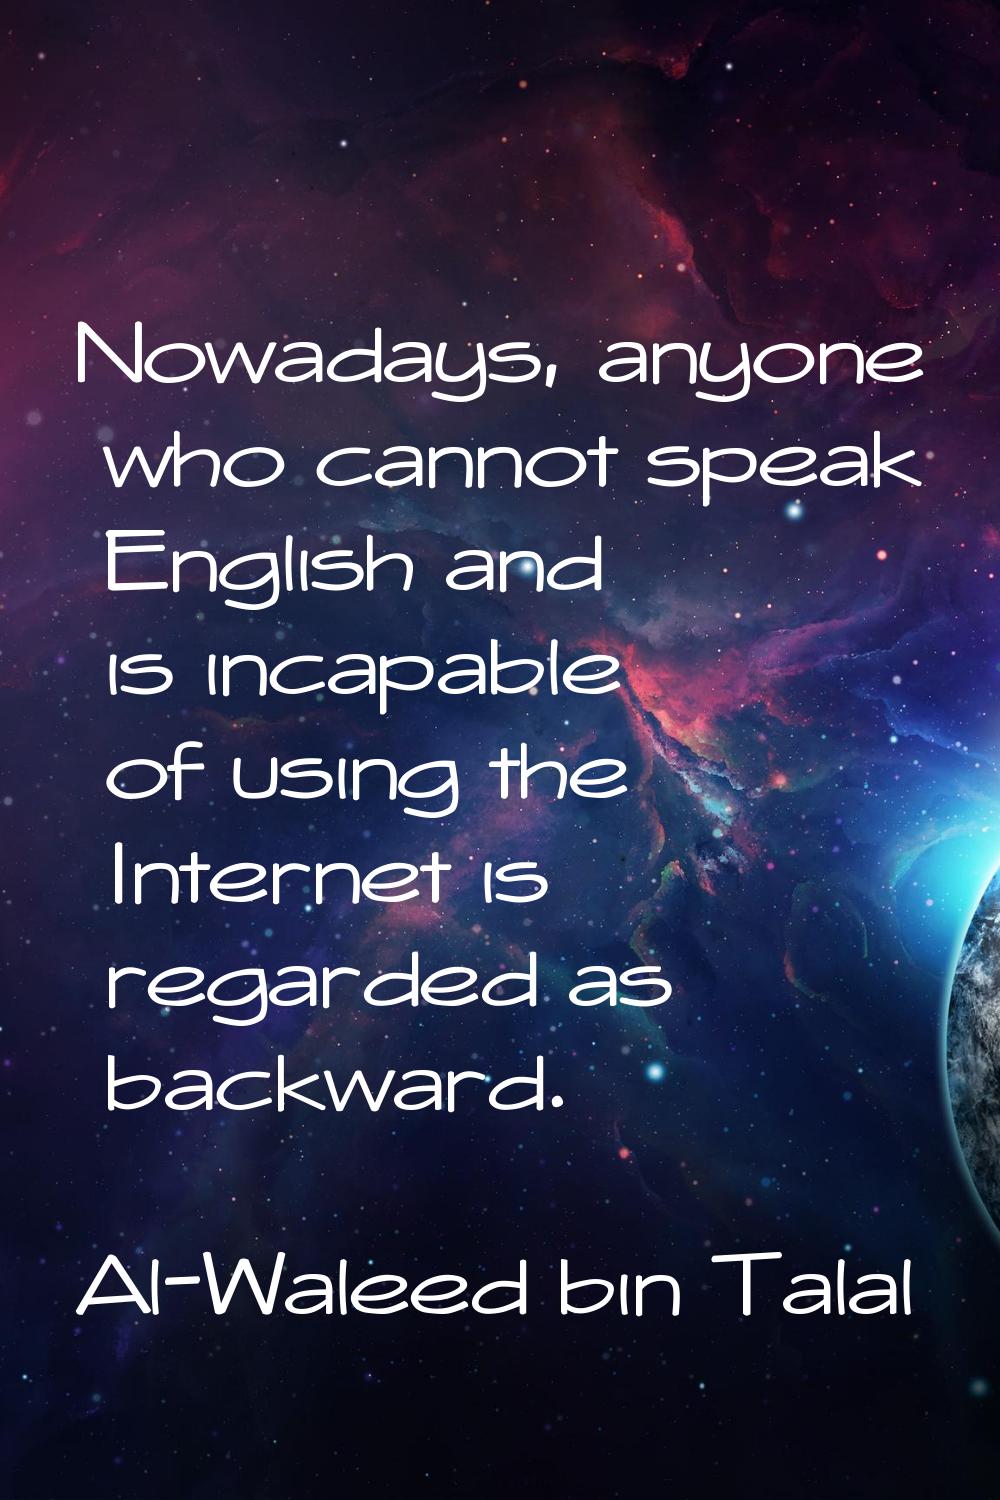 Nowadays, anyone who cannot speak English and is incapable of using the Internet is regarded as bac